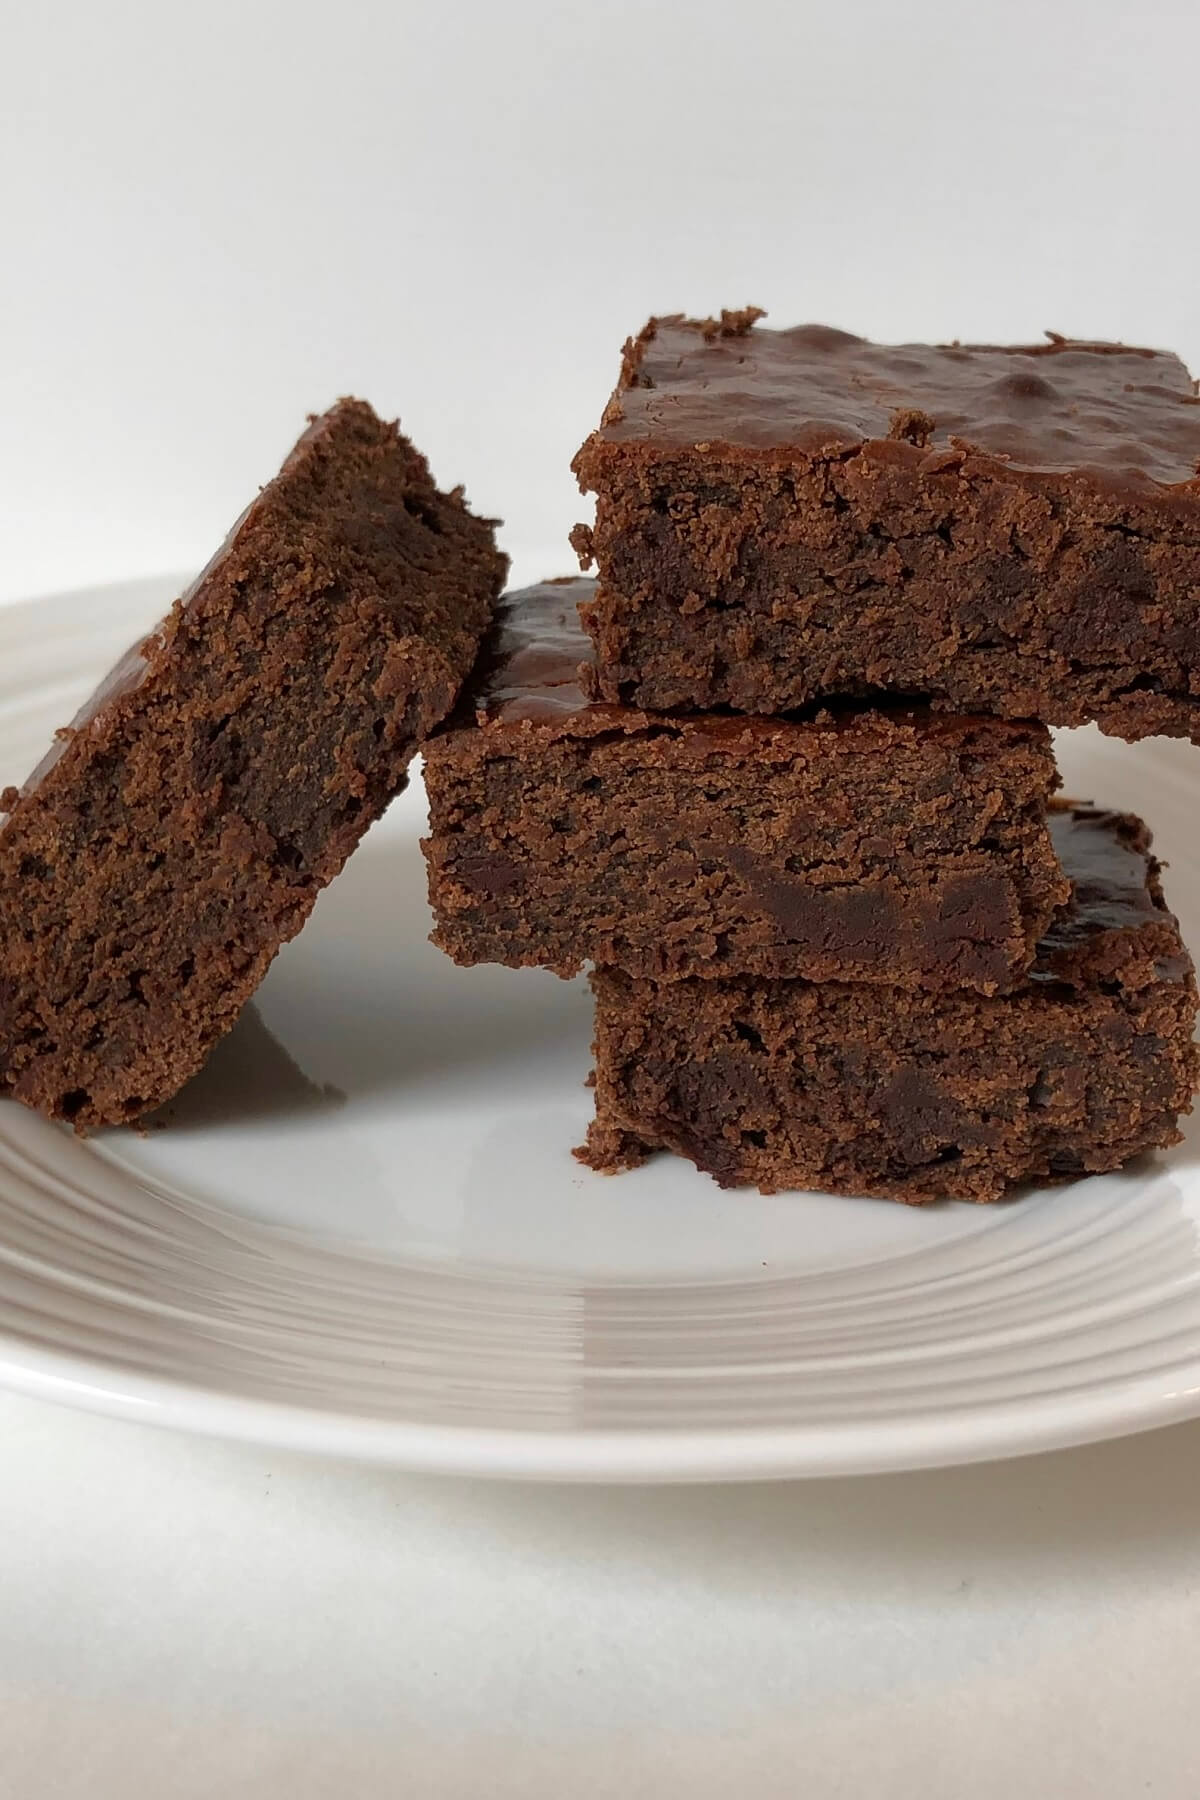 Four thick brownies stacked on a plate.